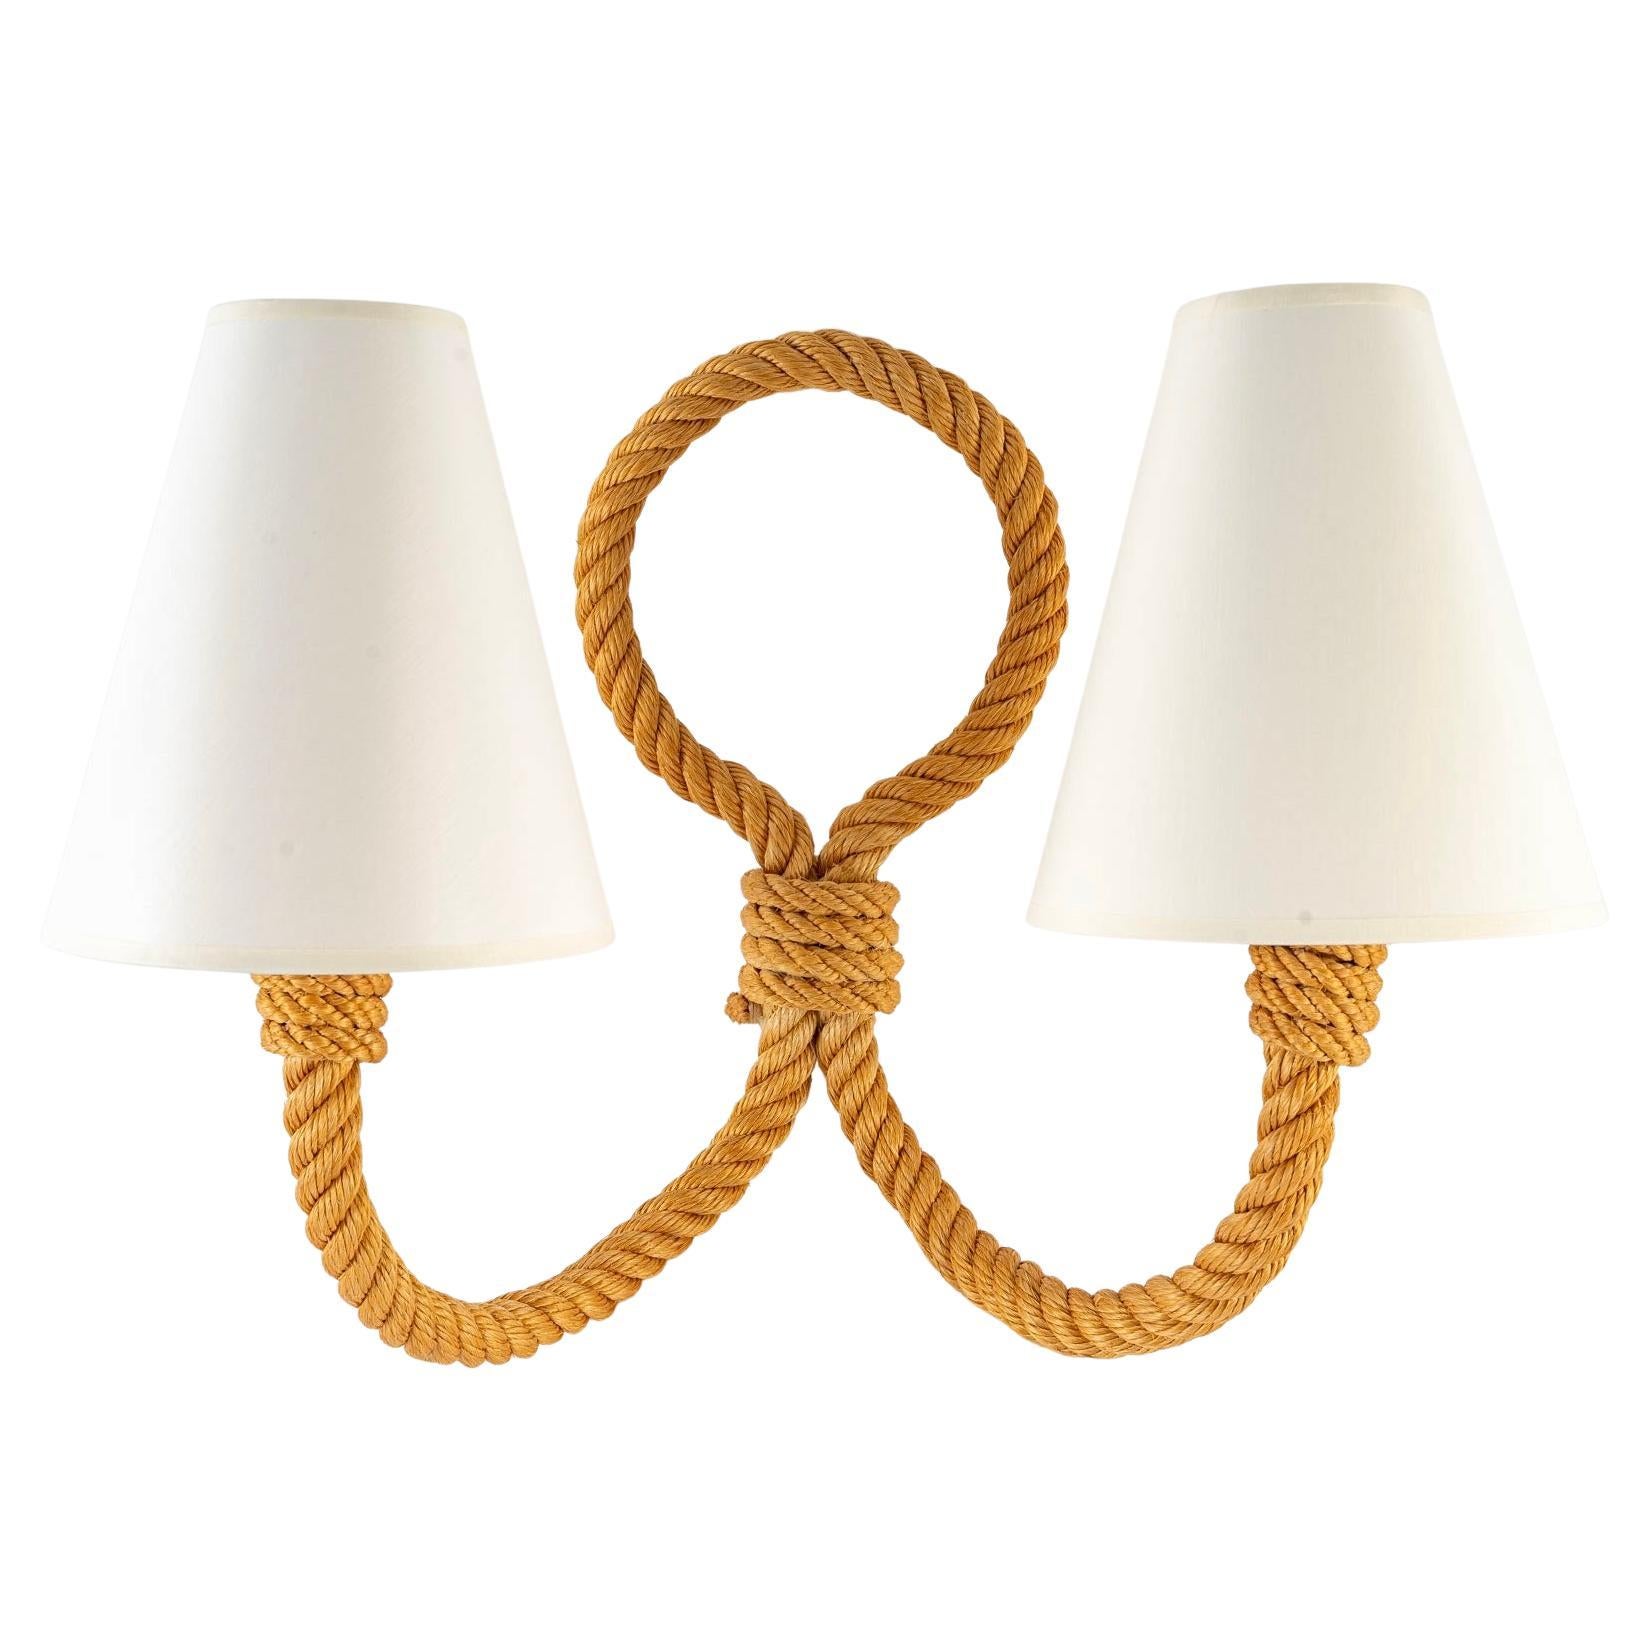 Composed of a long electrified rope arm forming a loop on the upper part and then separating on the lower part, it goes up on both sides of the sconce forming the two arms of light.
The two arms are dressed with lampshade of conical shape in